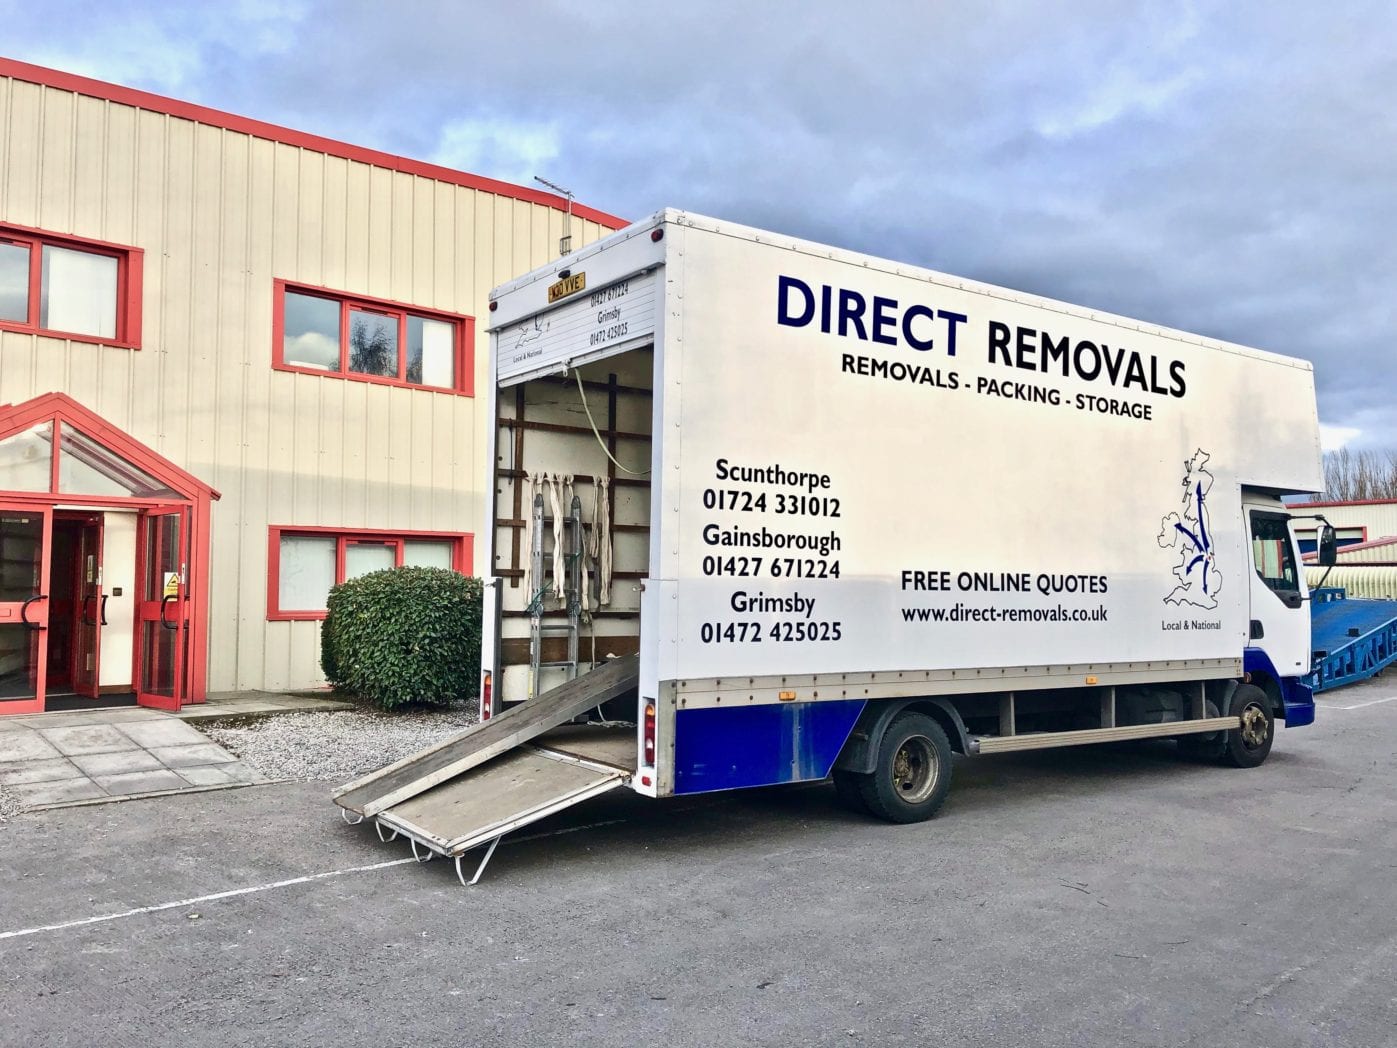 Business relocation service in Scunthorpe